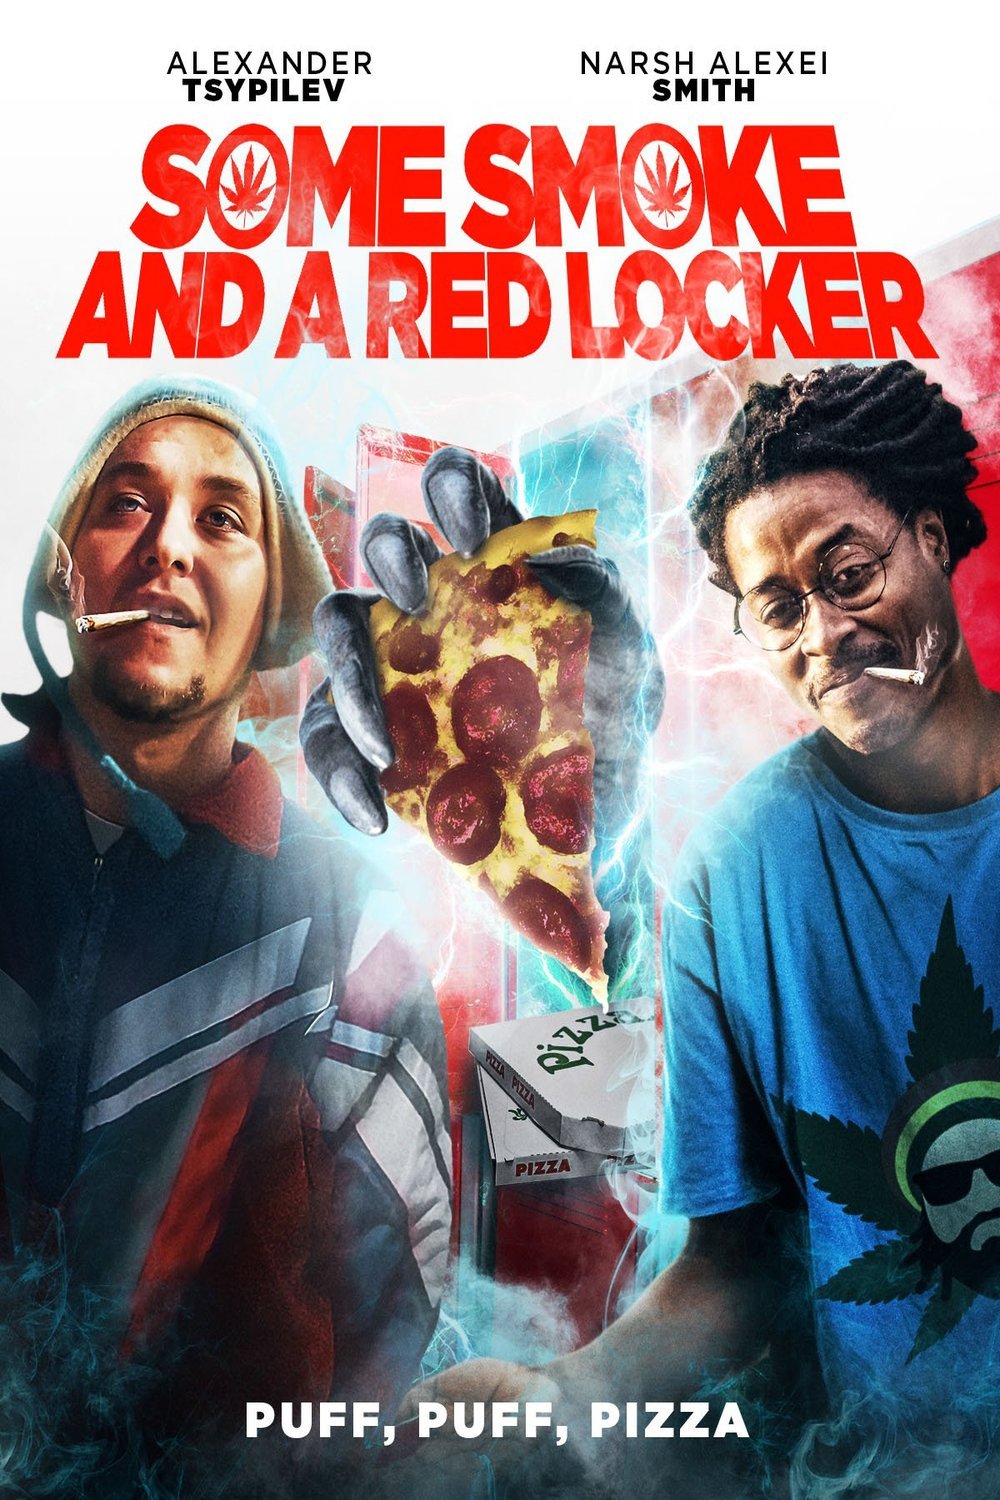 L'affiche du film Some Smoke and a Red Locker